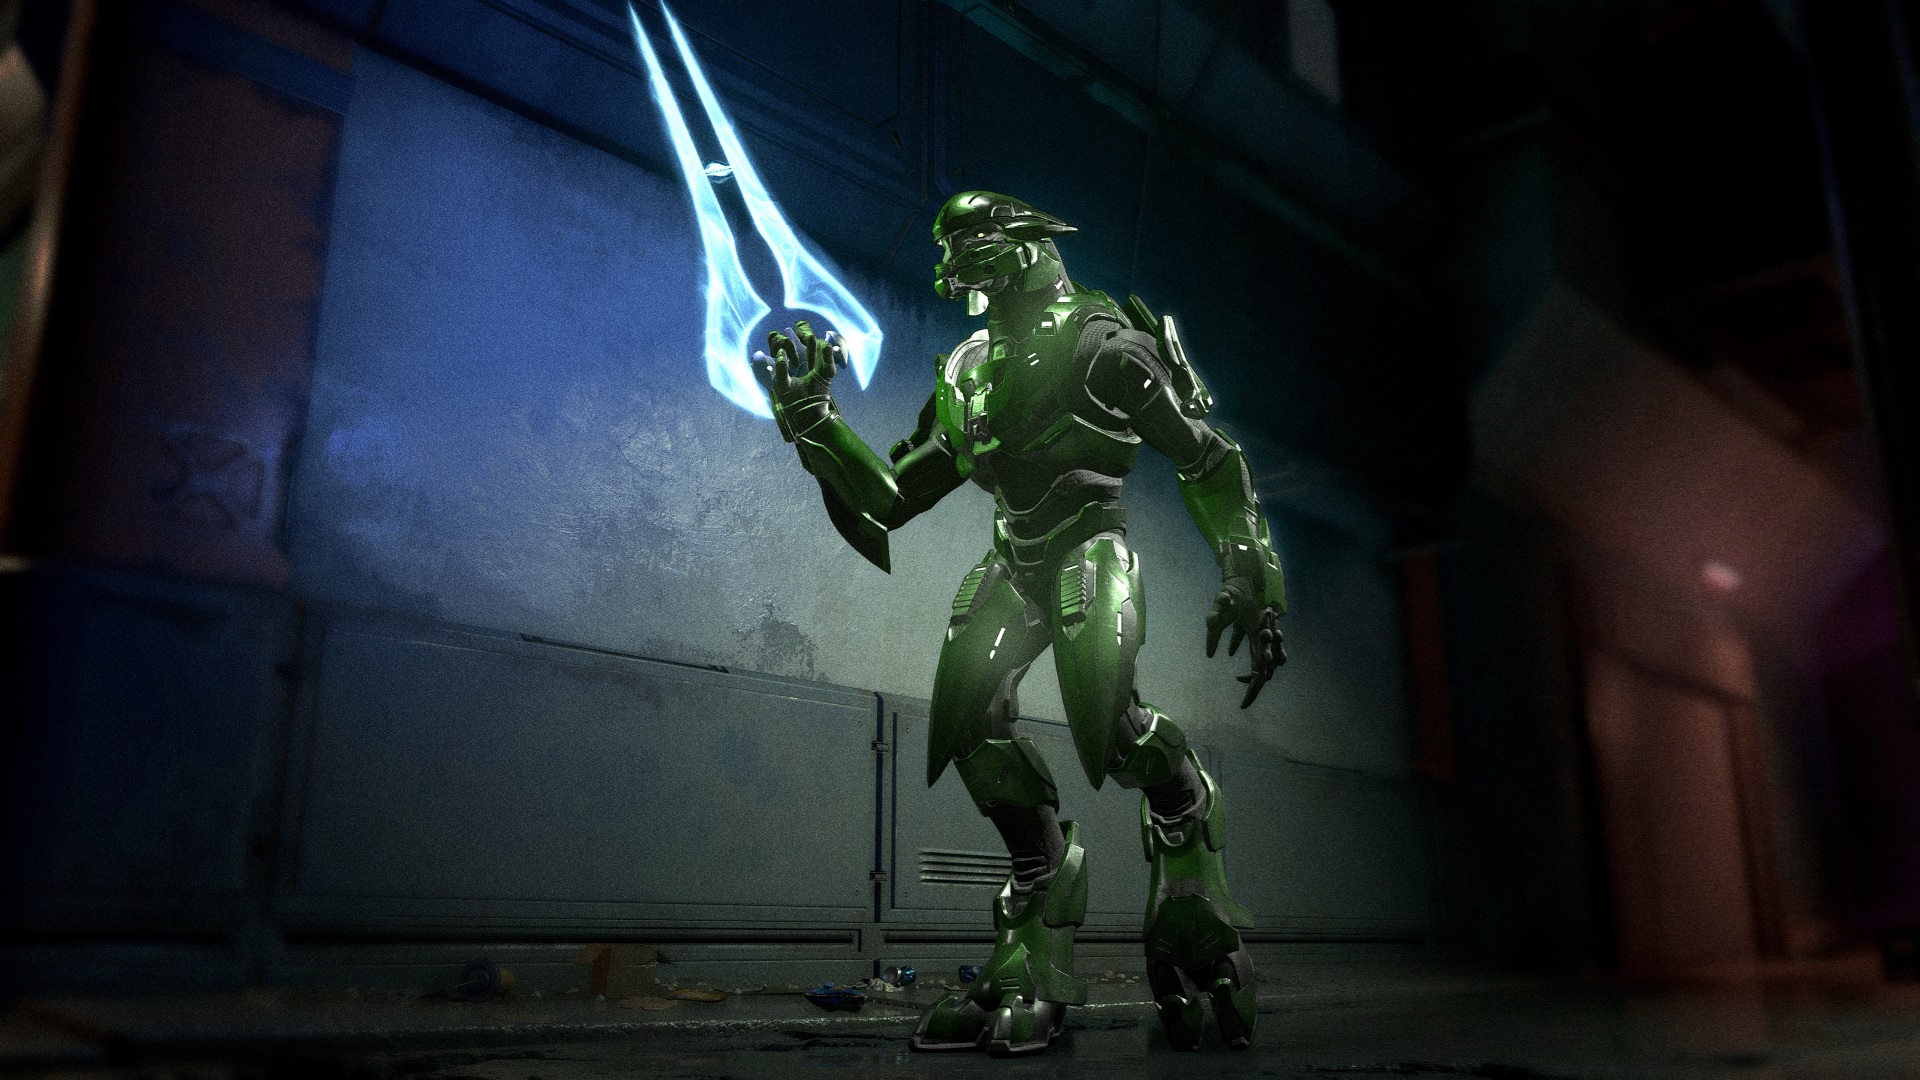 Duality image of a UNSC-aligned Sangheili in green armor holding an energy sword next to a building